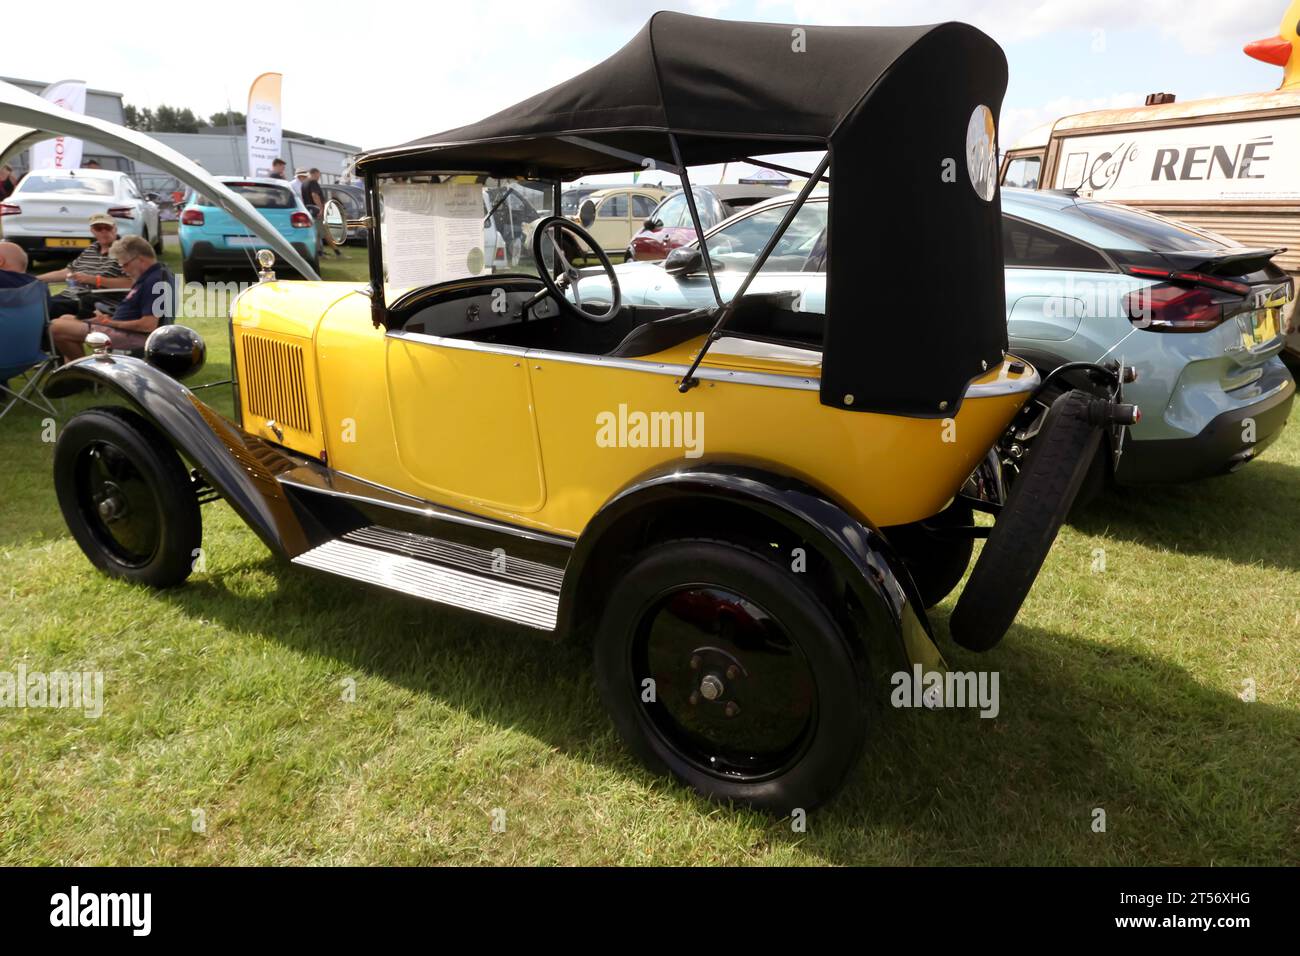 Three-quarter rear view of a 1925, Citroën C3 Cloverleaf,  on display at the 2023 British Motor Show Stock Photo